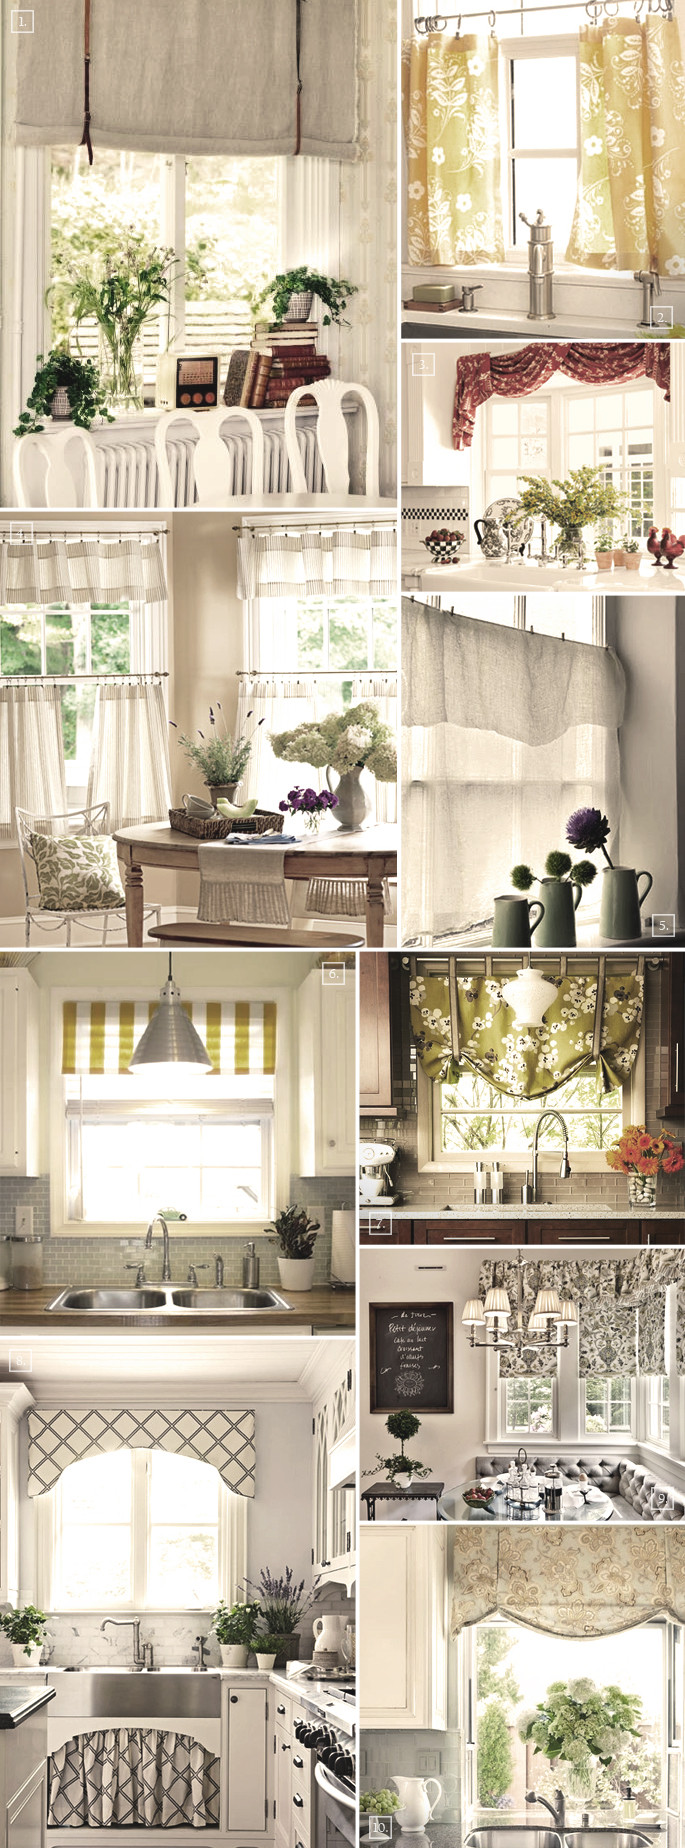 Curtain Ideas For Kitchen
 Decorating The Windows With These Kitchen Curtain Ideas